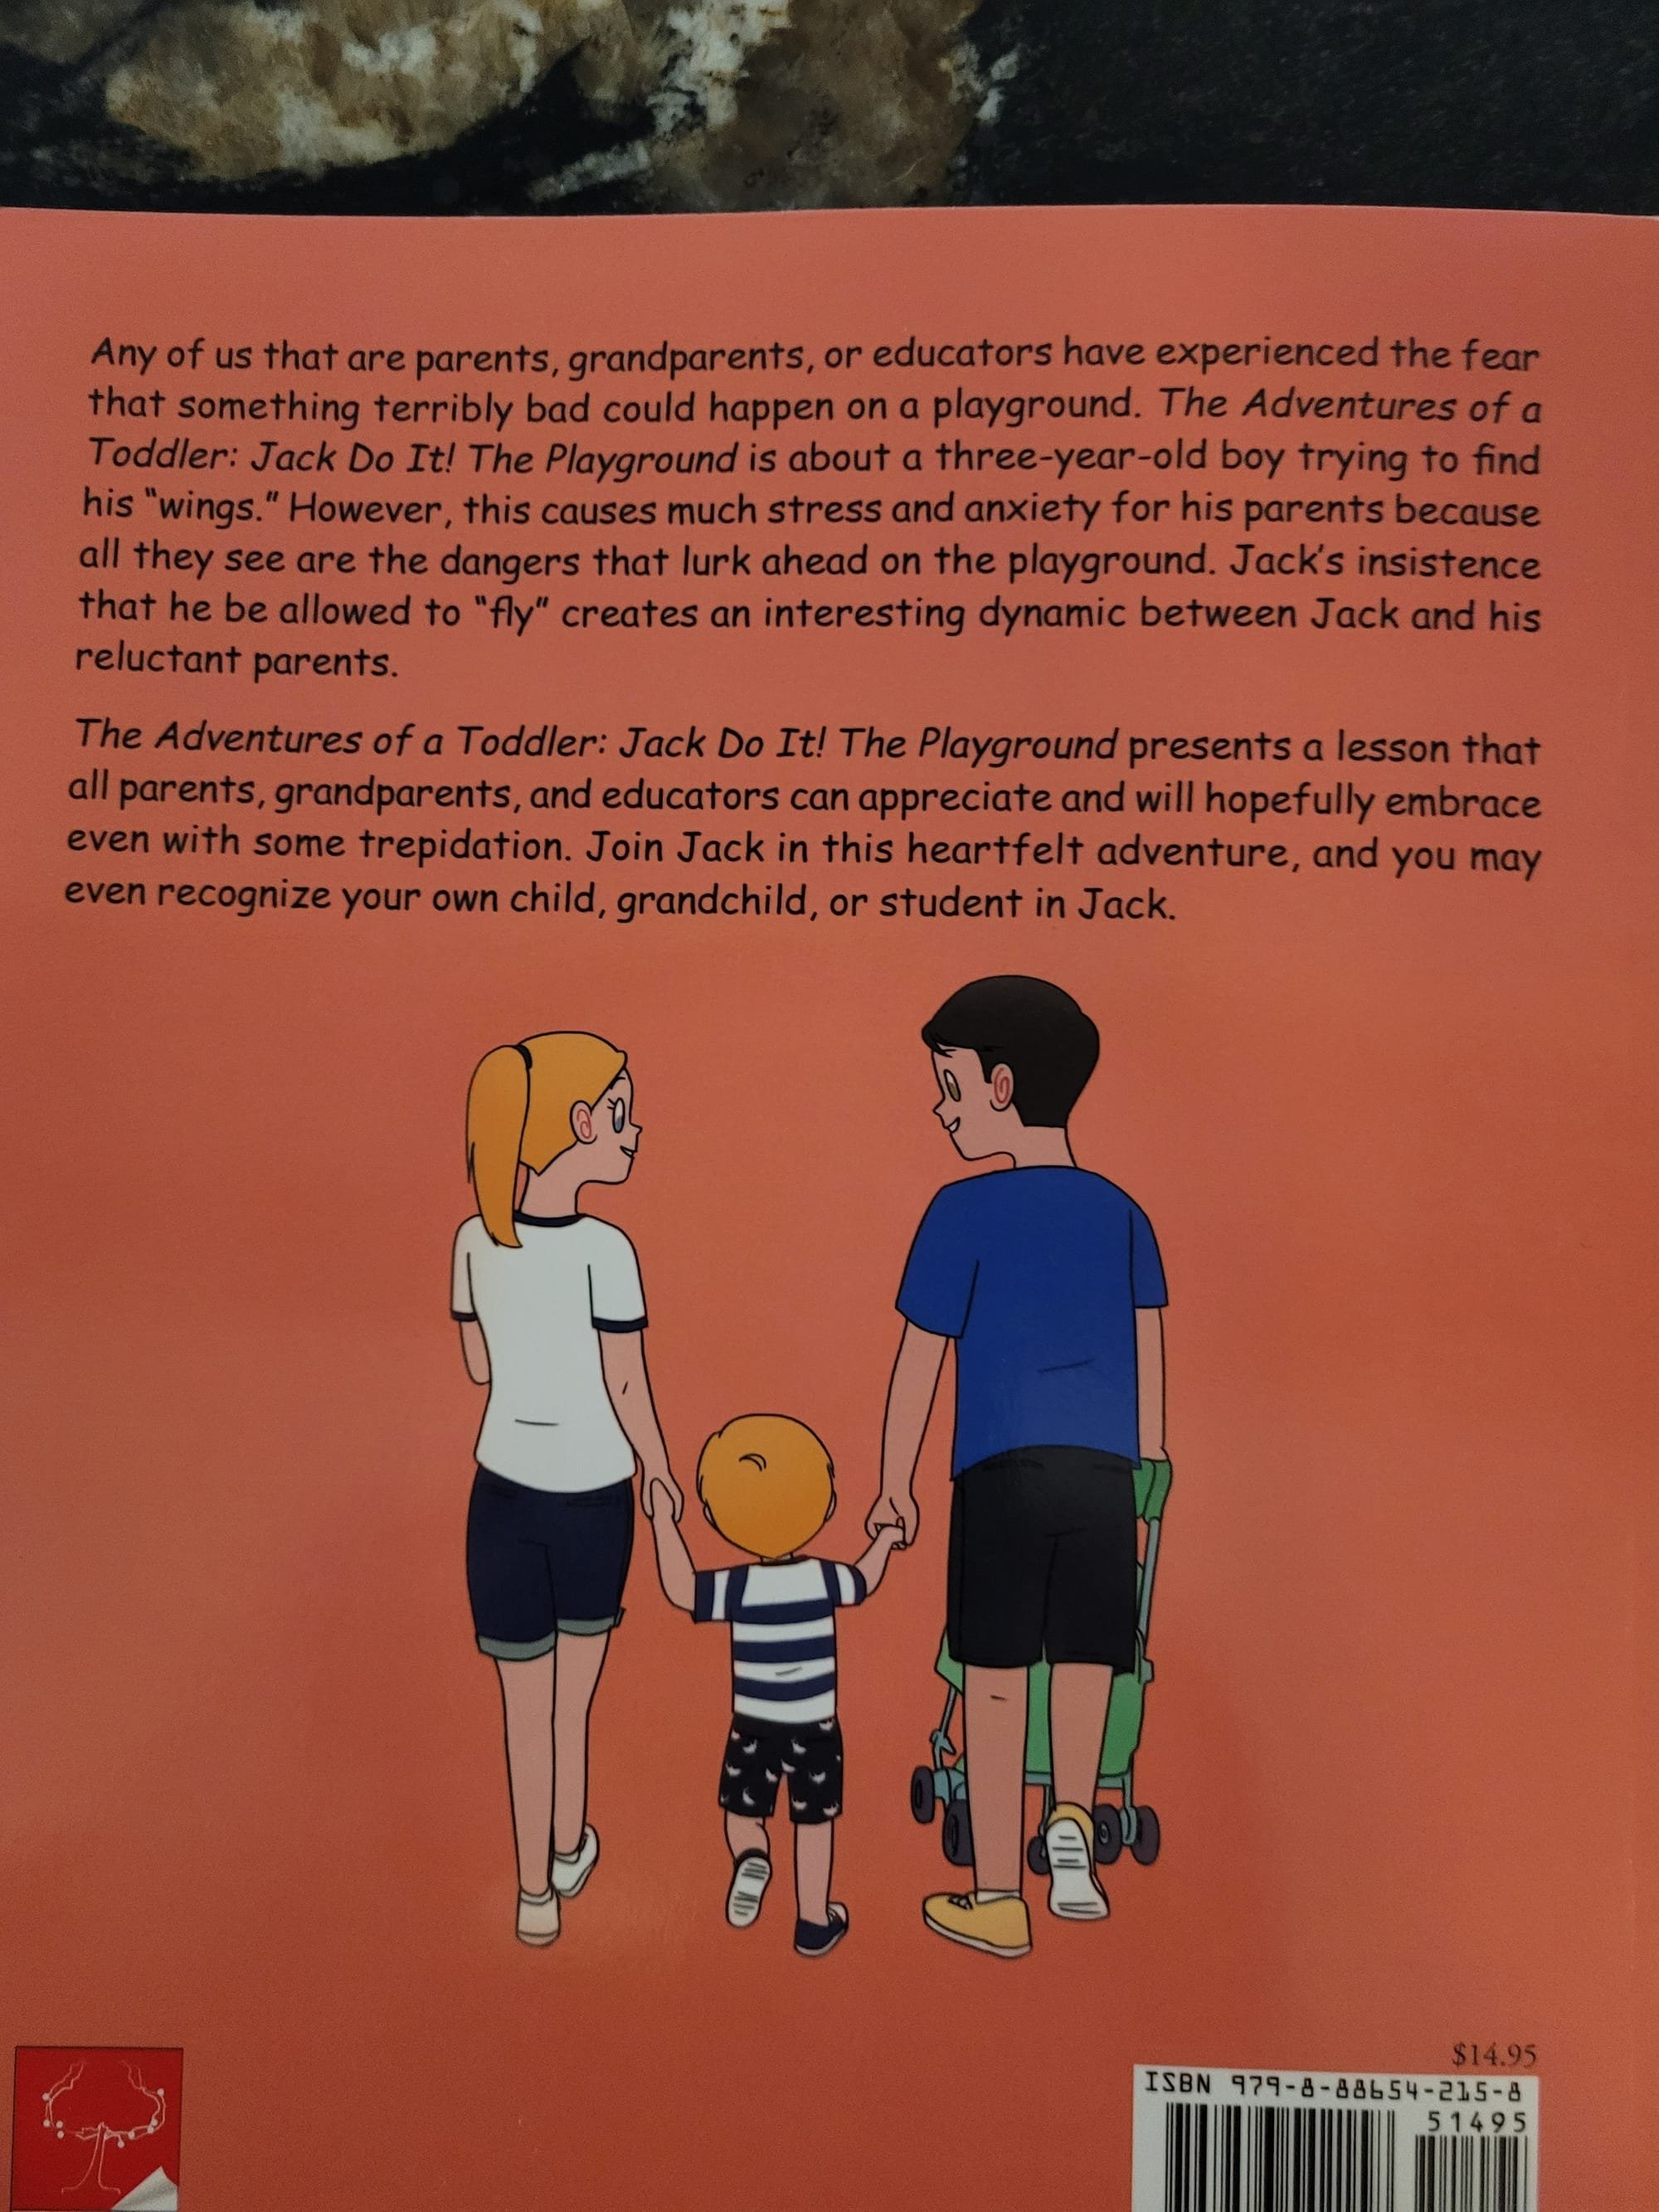 About the Book: Adventures of a Toddler by Charles Bauer (Back Cover)